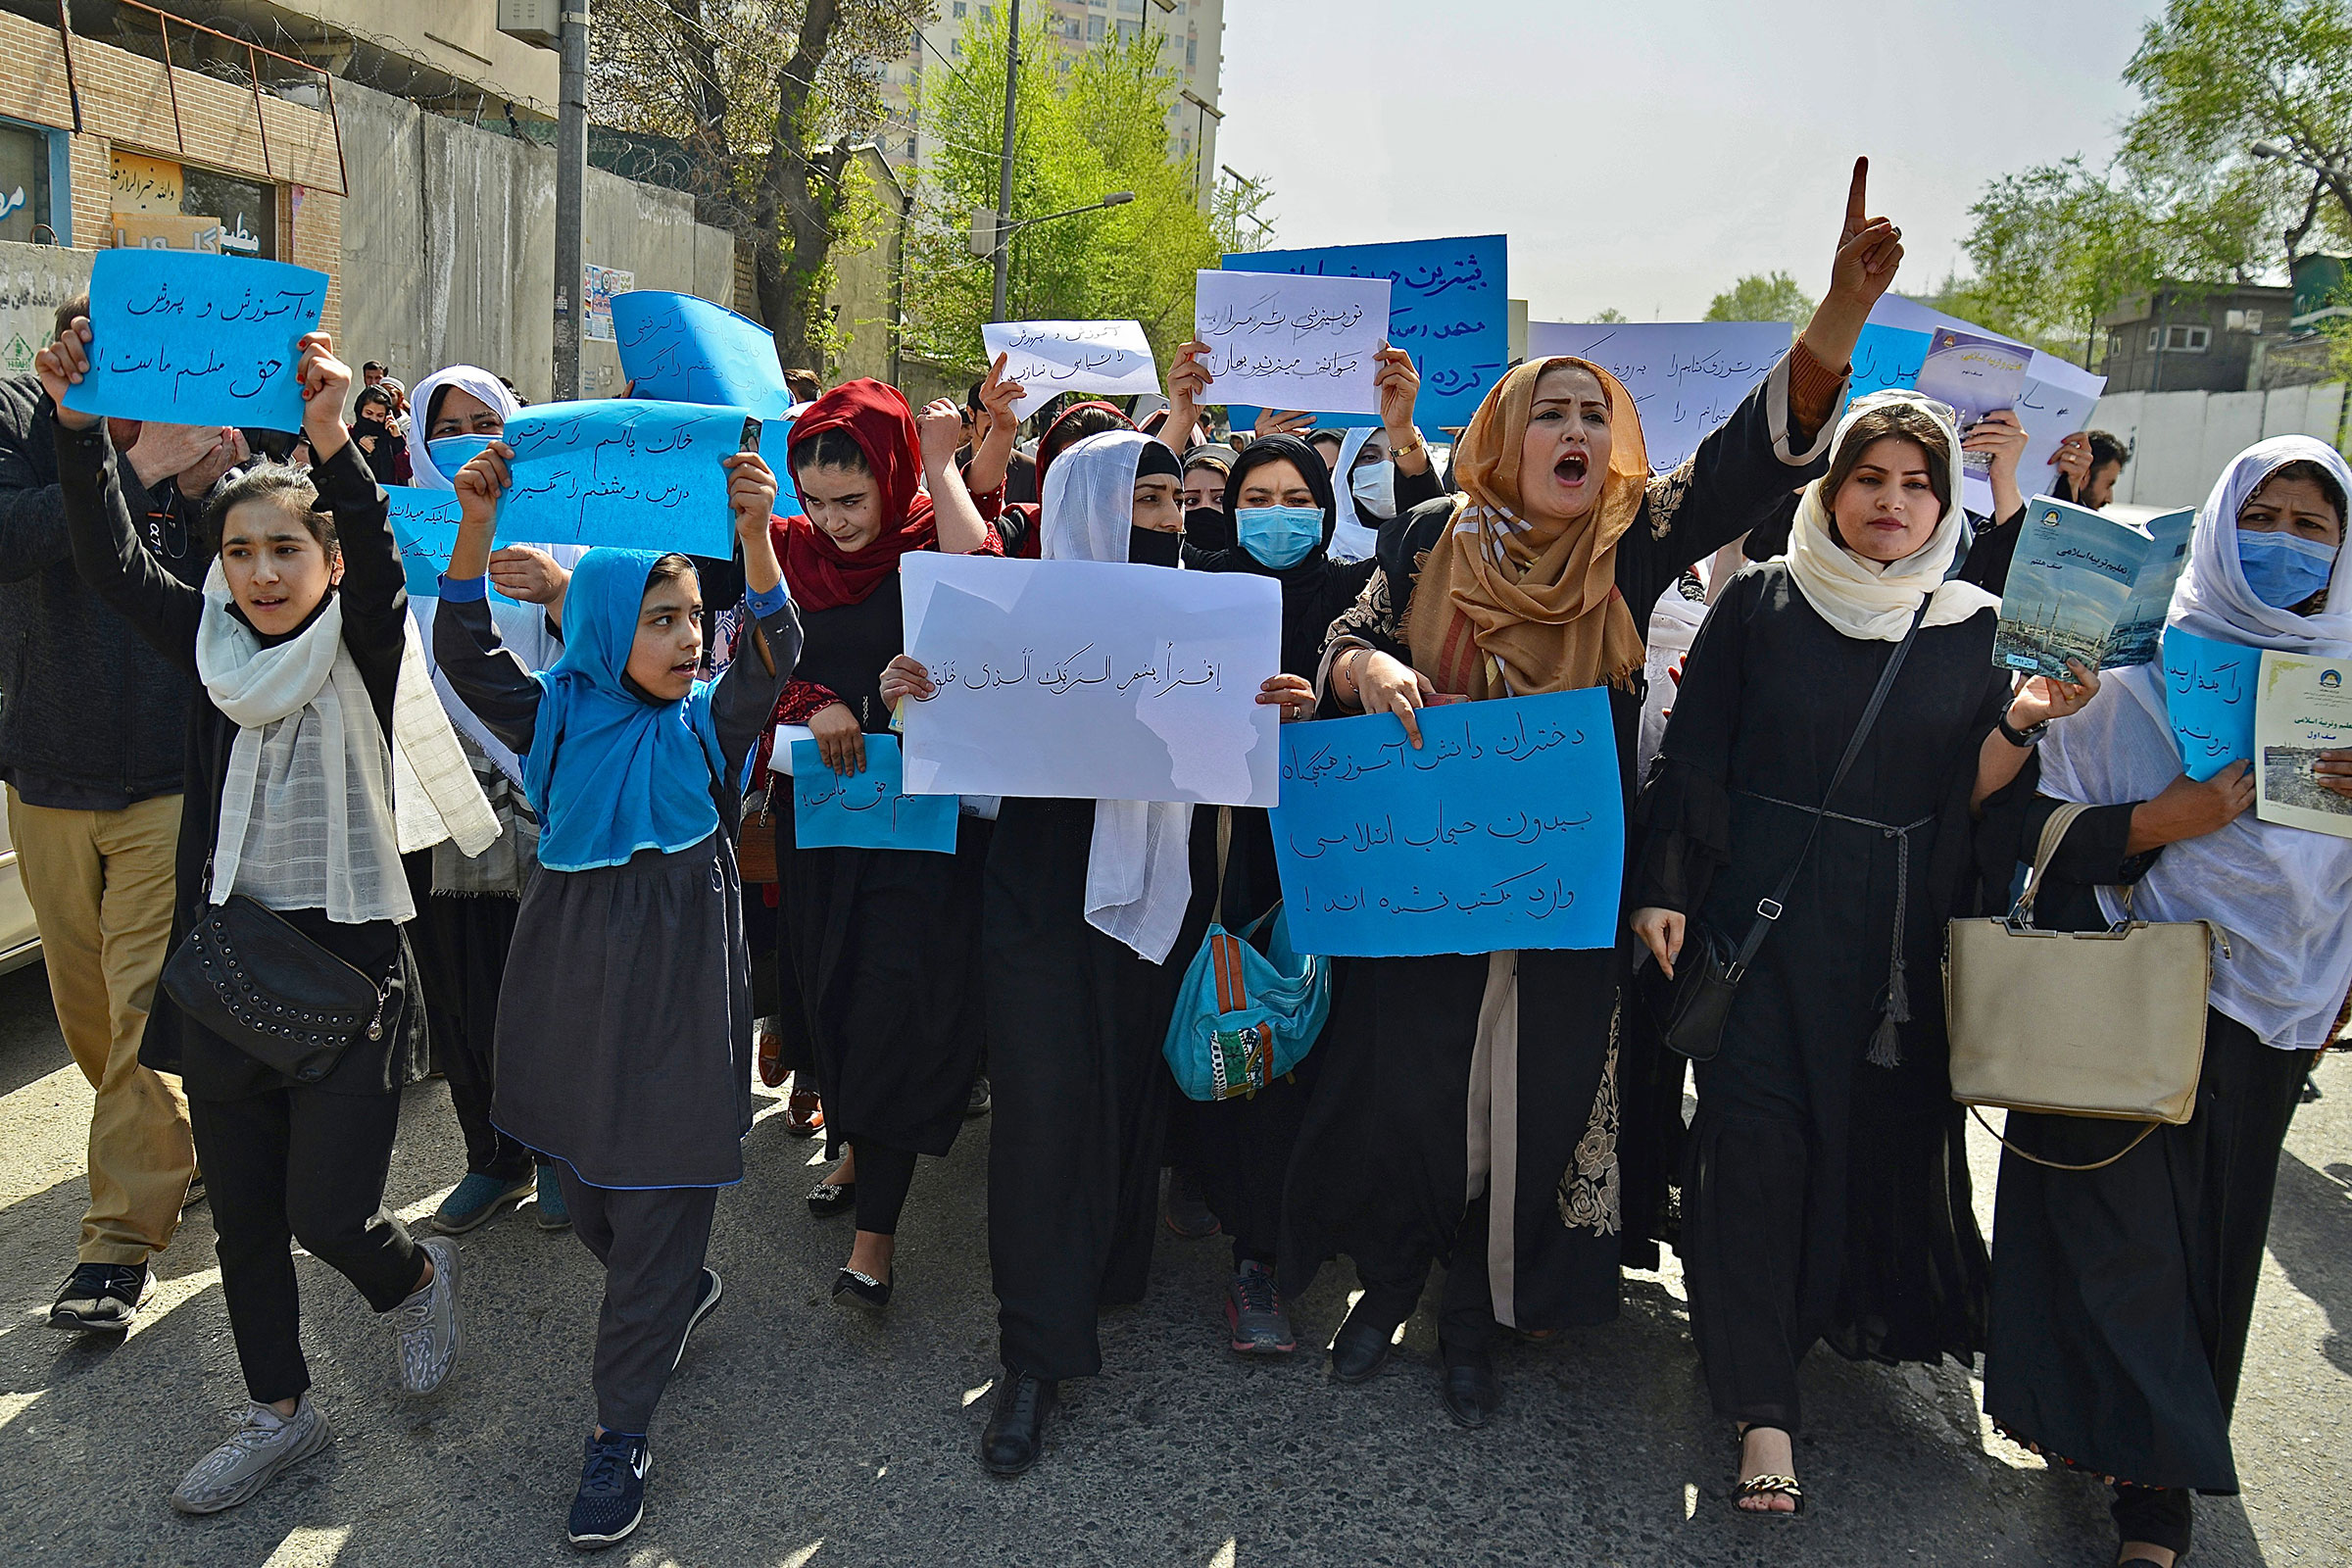 Afghan women and girls protest in front of the Ministry of Education in Kabul demanding that high schools be reopened for girls, on March 26, 2022. (Ahmad Sahel Arman—AFP/Getty Images)